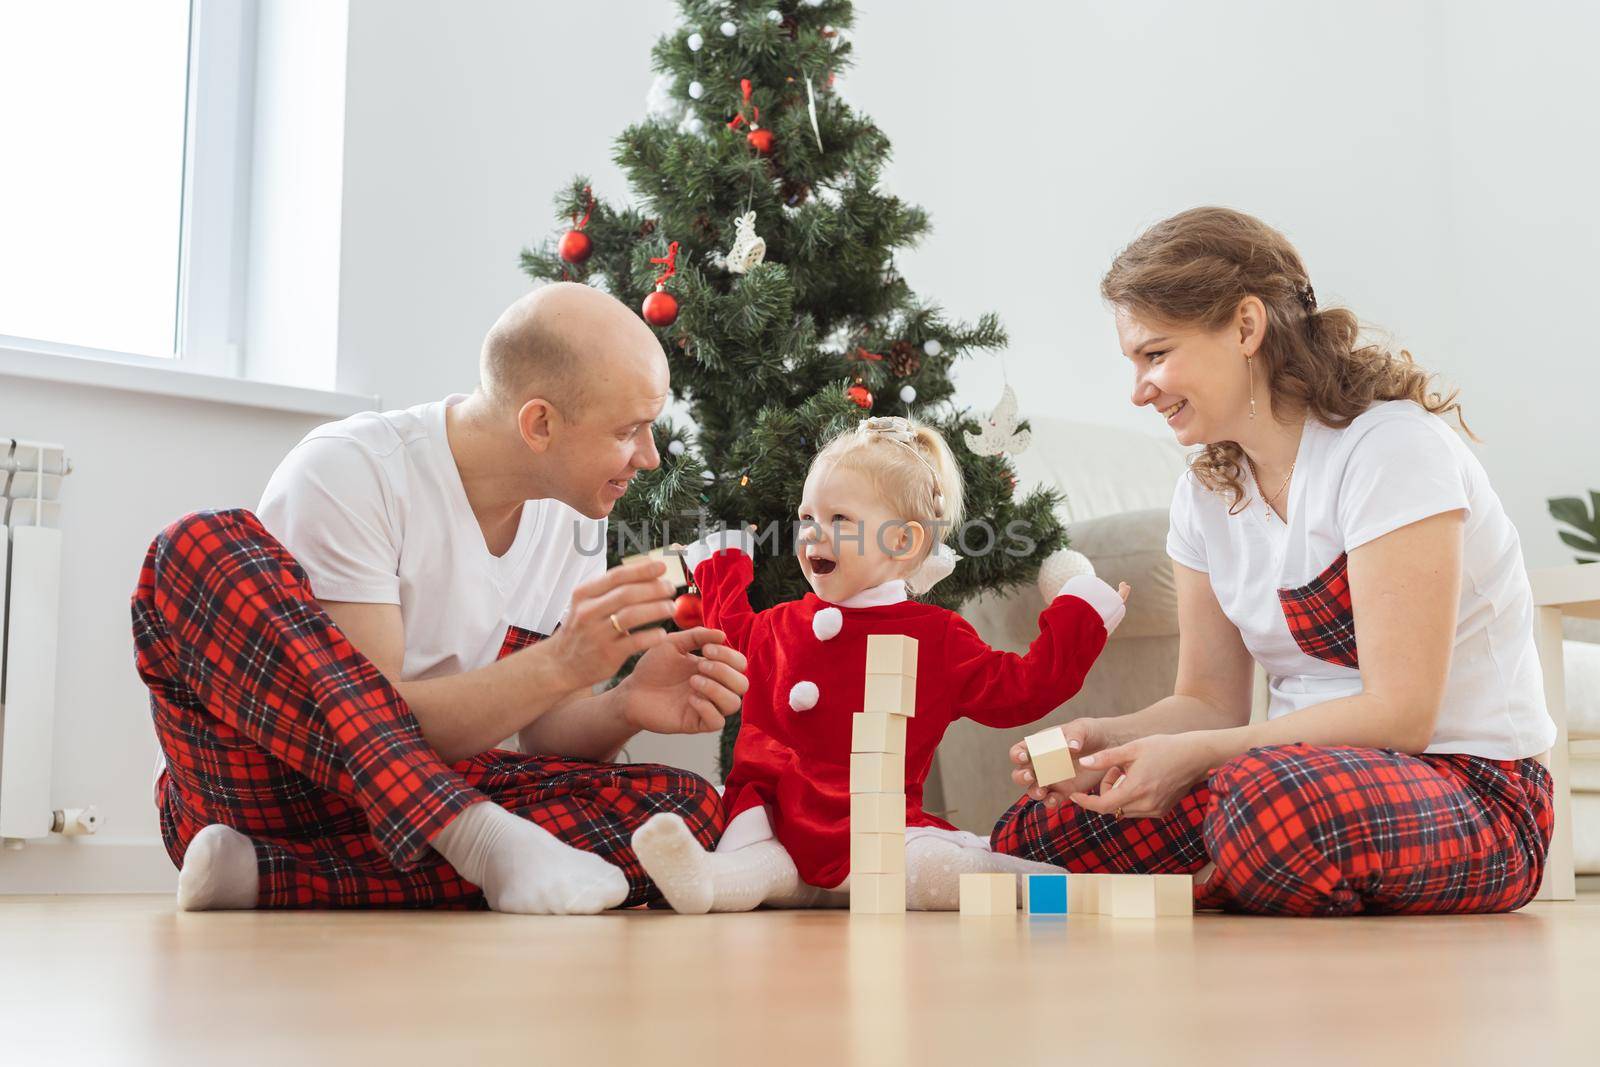 Baby child with hearing aid and cochlear implant having fun with parents in christmas room. Deaf , diversity and health and diversity by Satura86